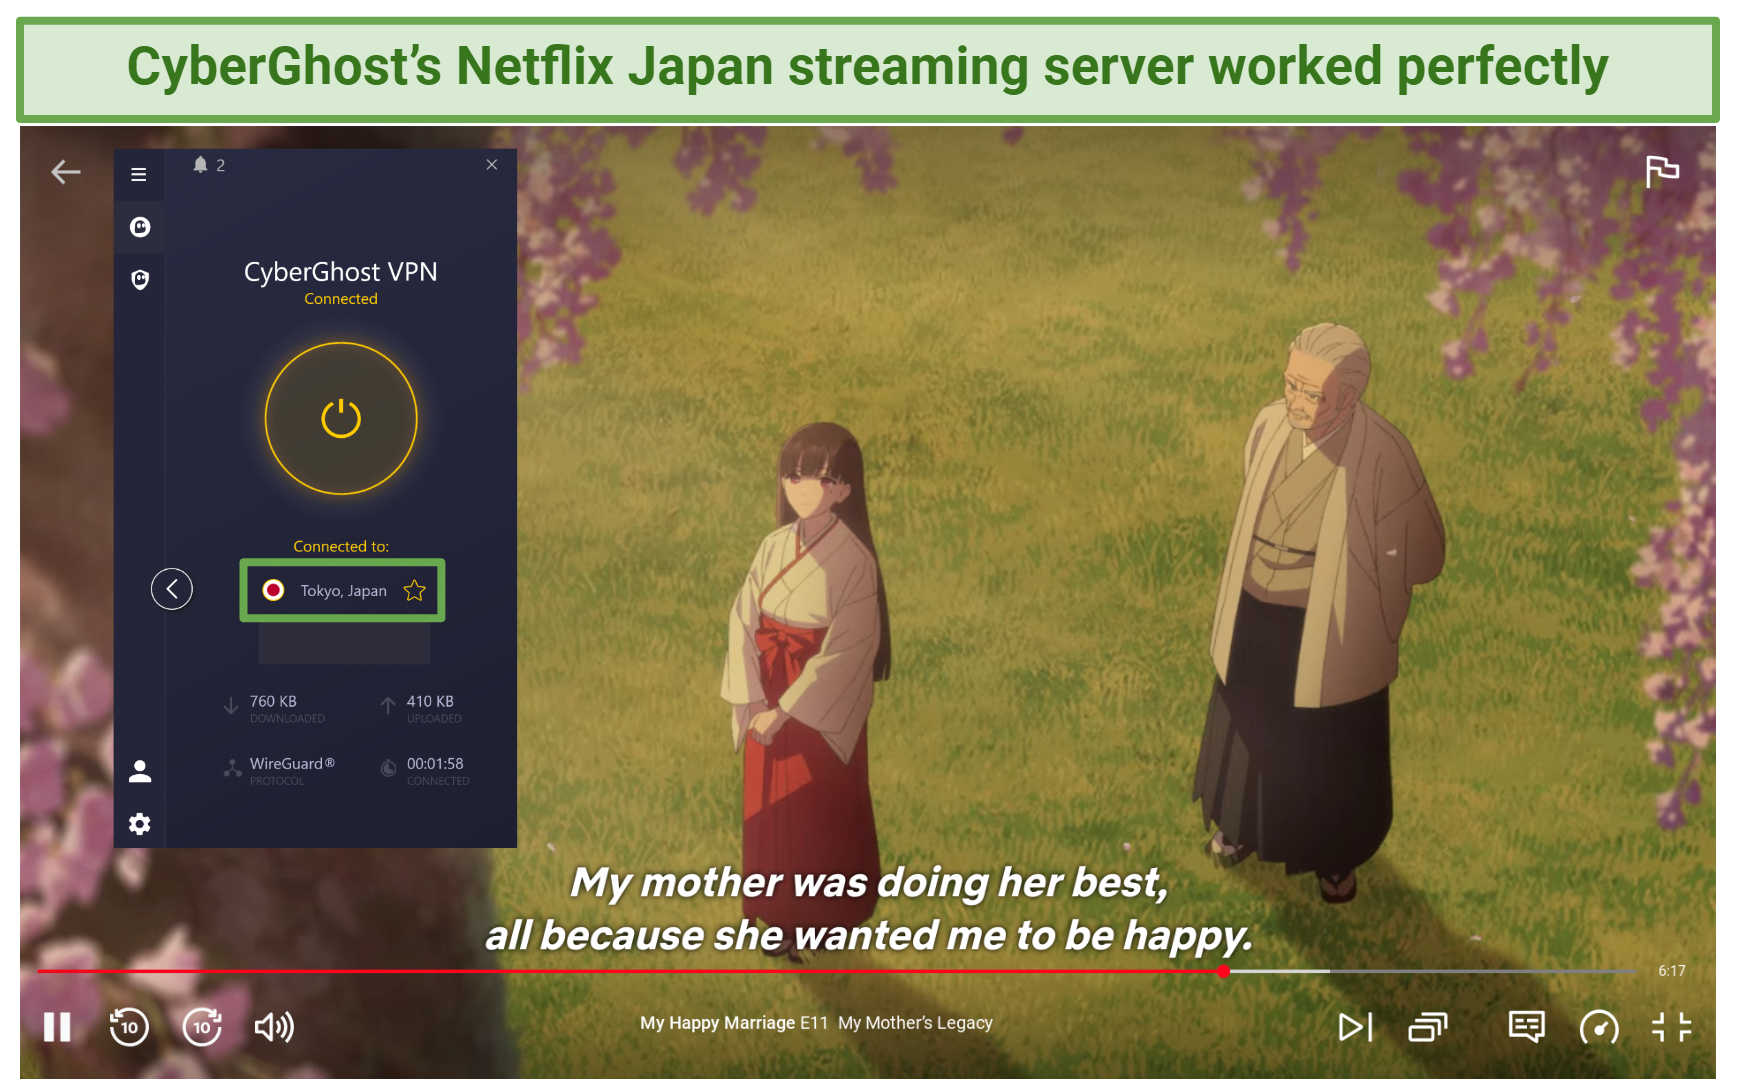 CyberGhost's Netflix Japan server connected while streaming Netflix from Japan